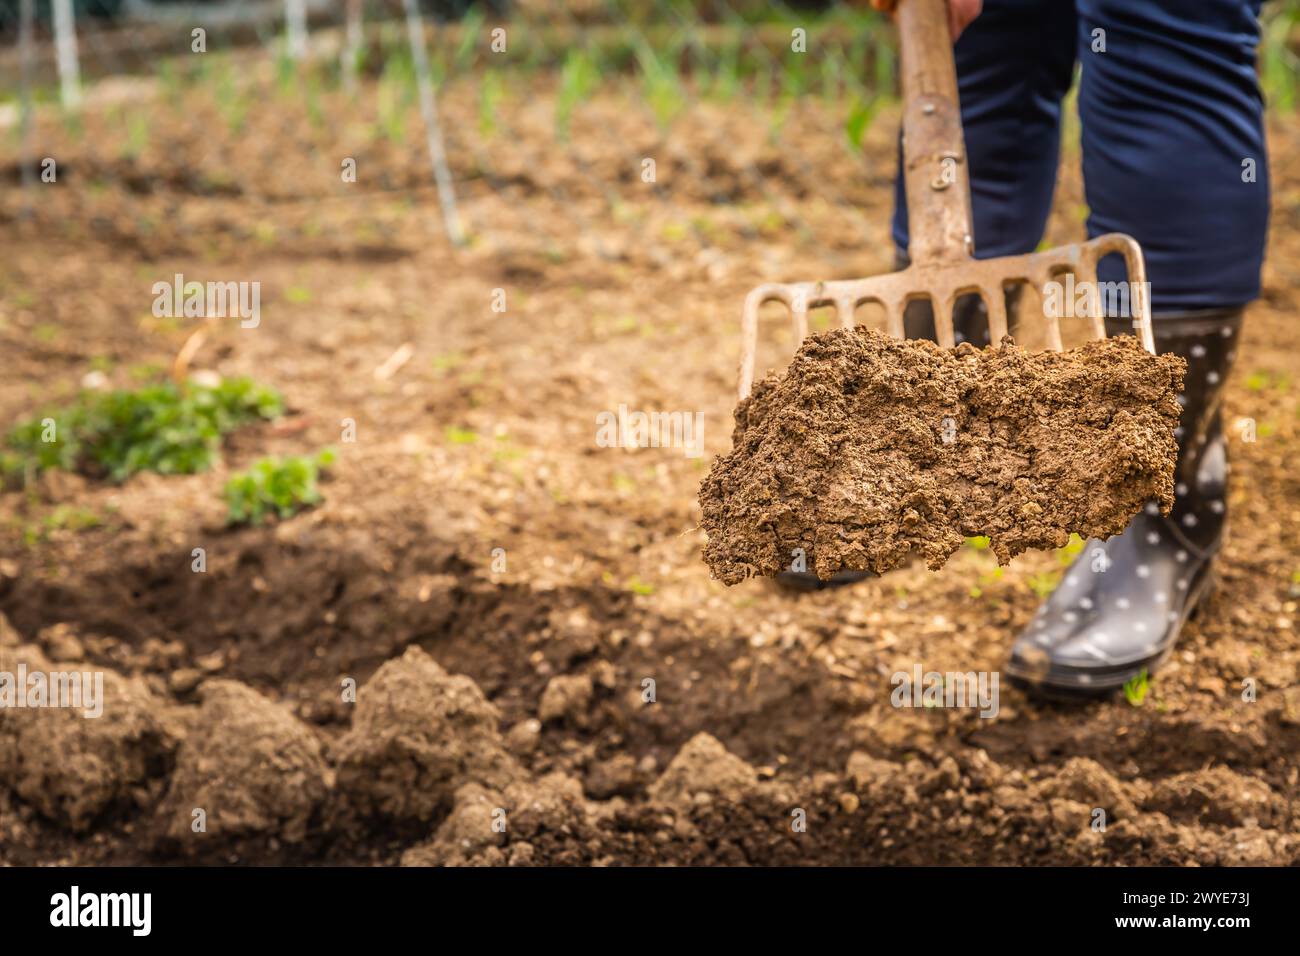 Edelrly gardener digging soil with a garden fork to cultivate soil ready for planting, spring gardening Stock Photo